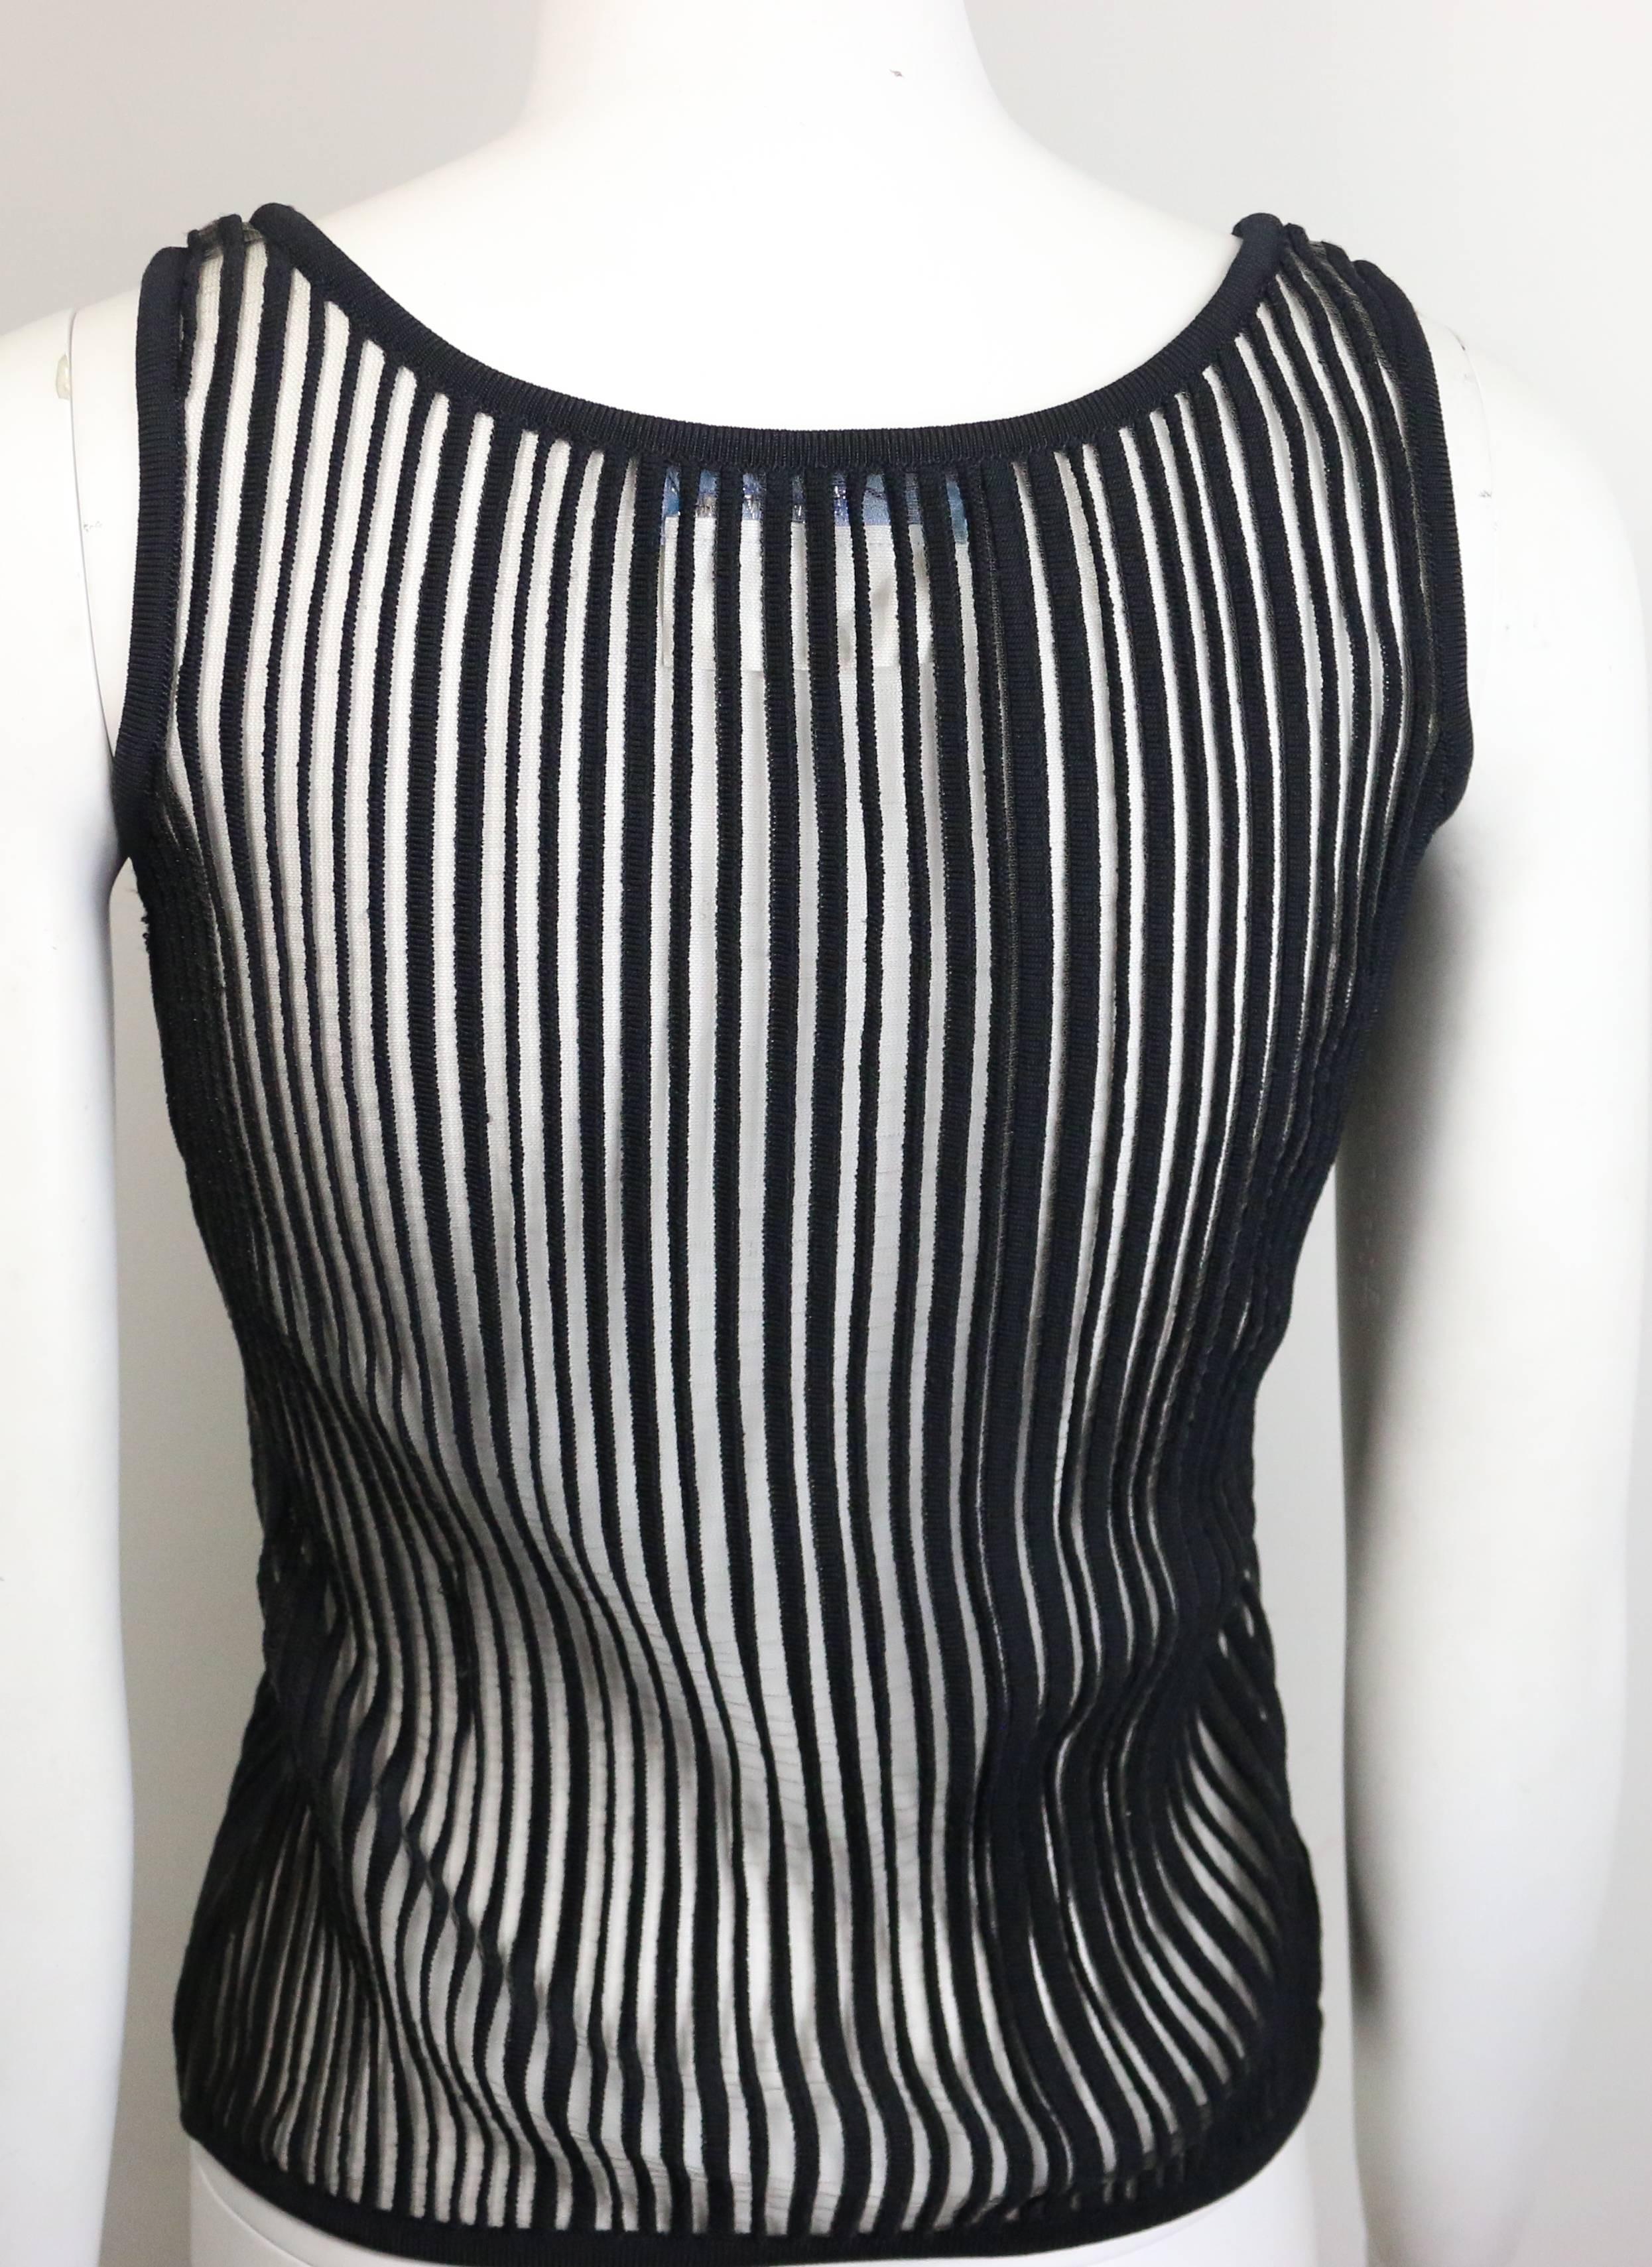 - Vintage 90s Thierry Mugler black knitted vertical stripe see through tank top. This sexy tank top is rare! 

- Made in Italy. 

- Size M. 

- 90% Nylon, 7% Polyamide, 3% Elasthanne. 



